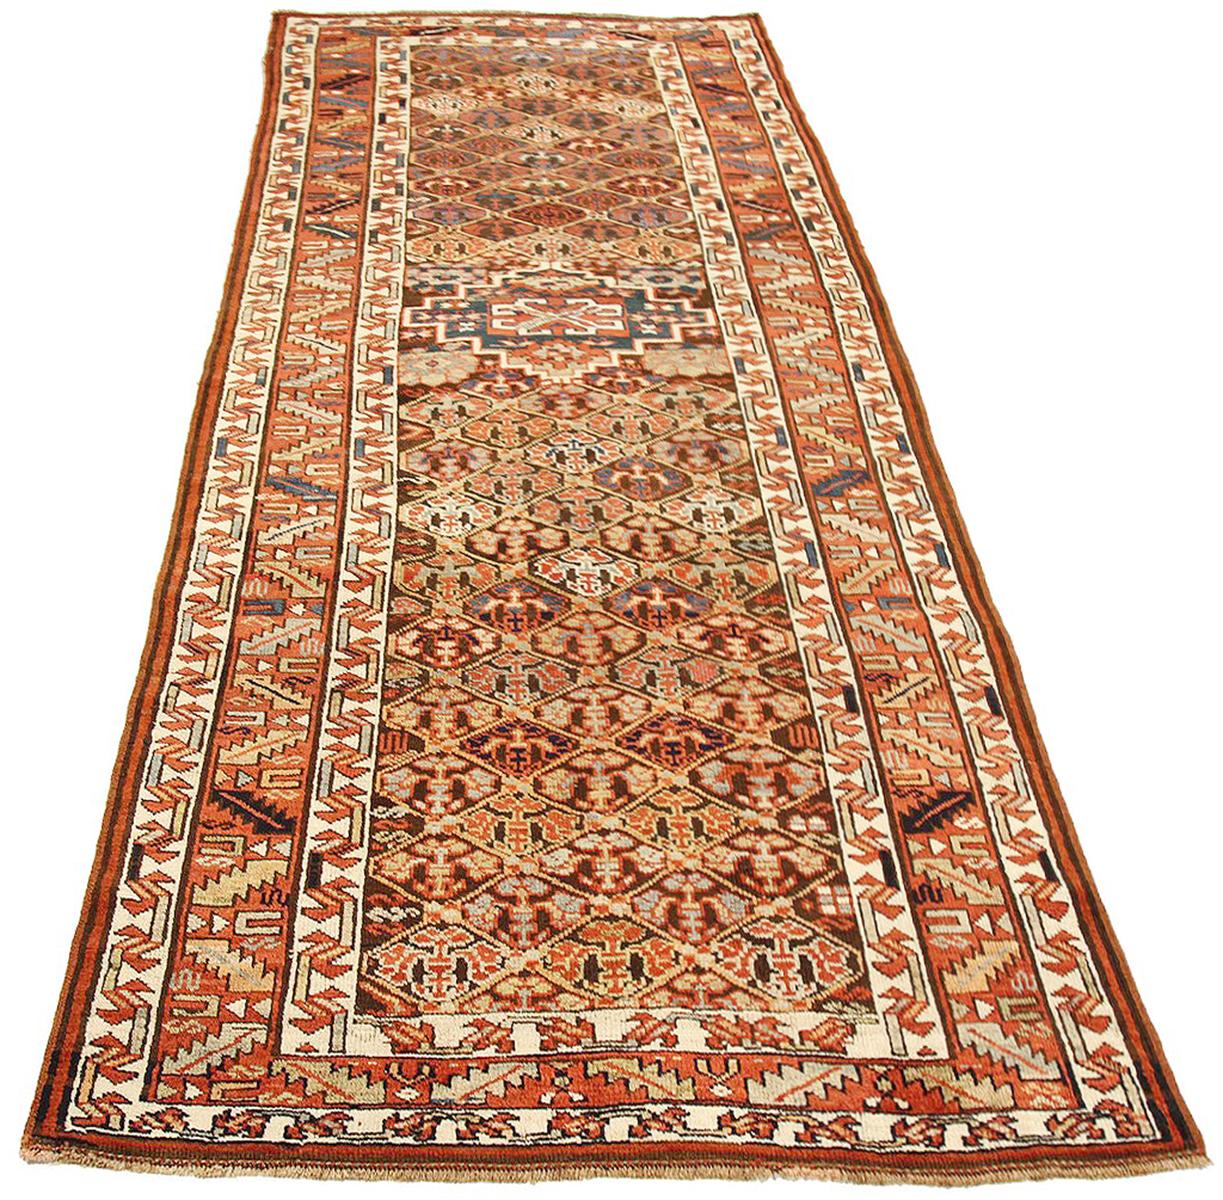 Hand-Woven 1900s Persian Bijar Runner Rug with Red & Brown All-Over Floral Motifs on Ivory For Sale